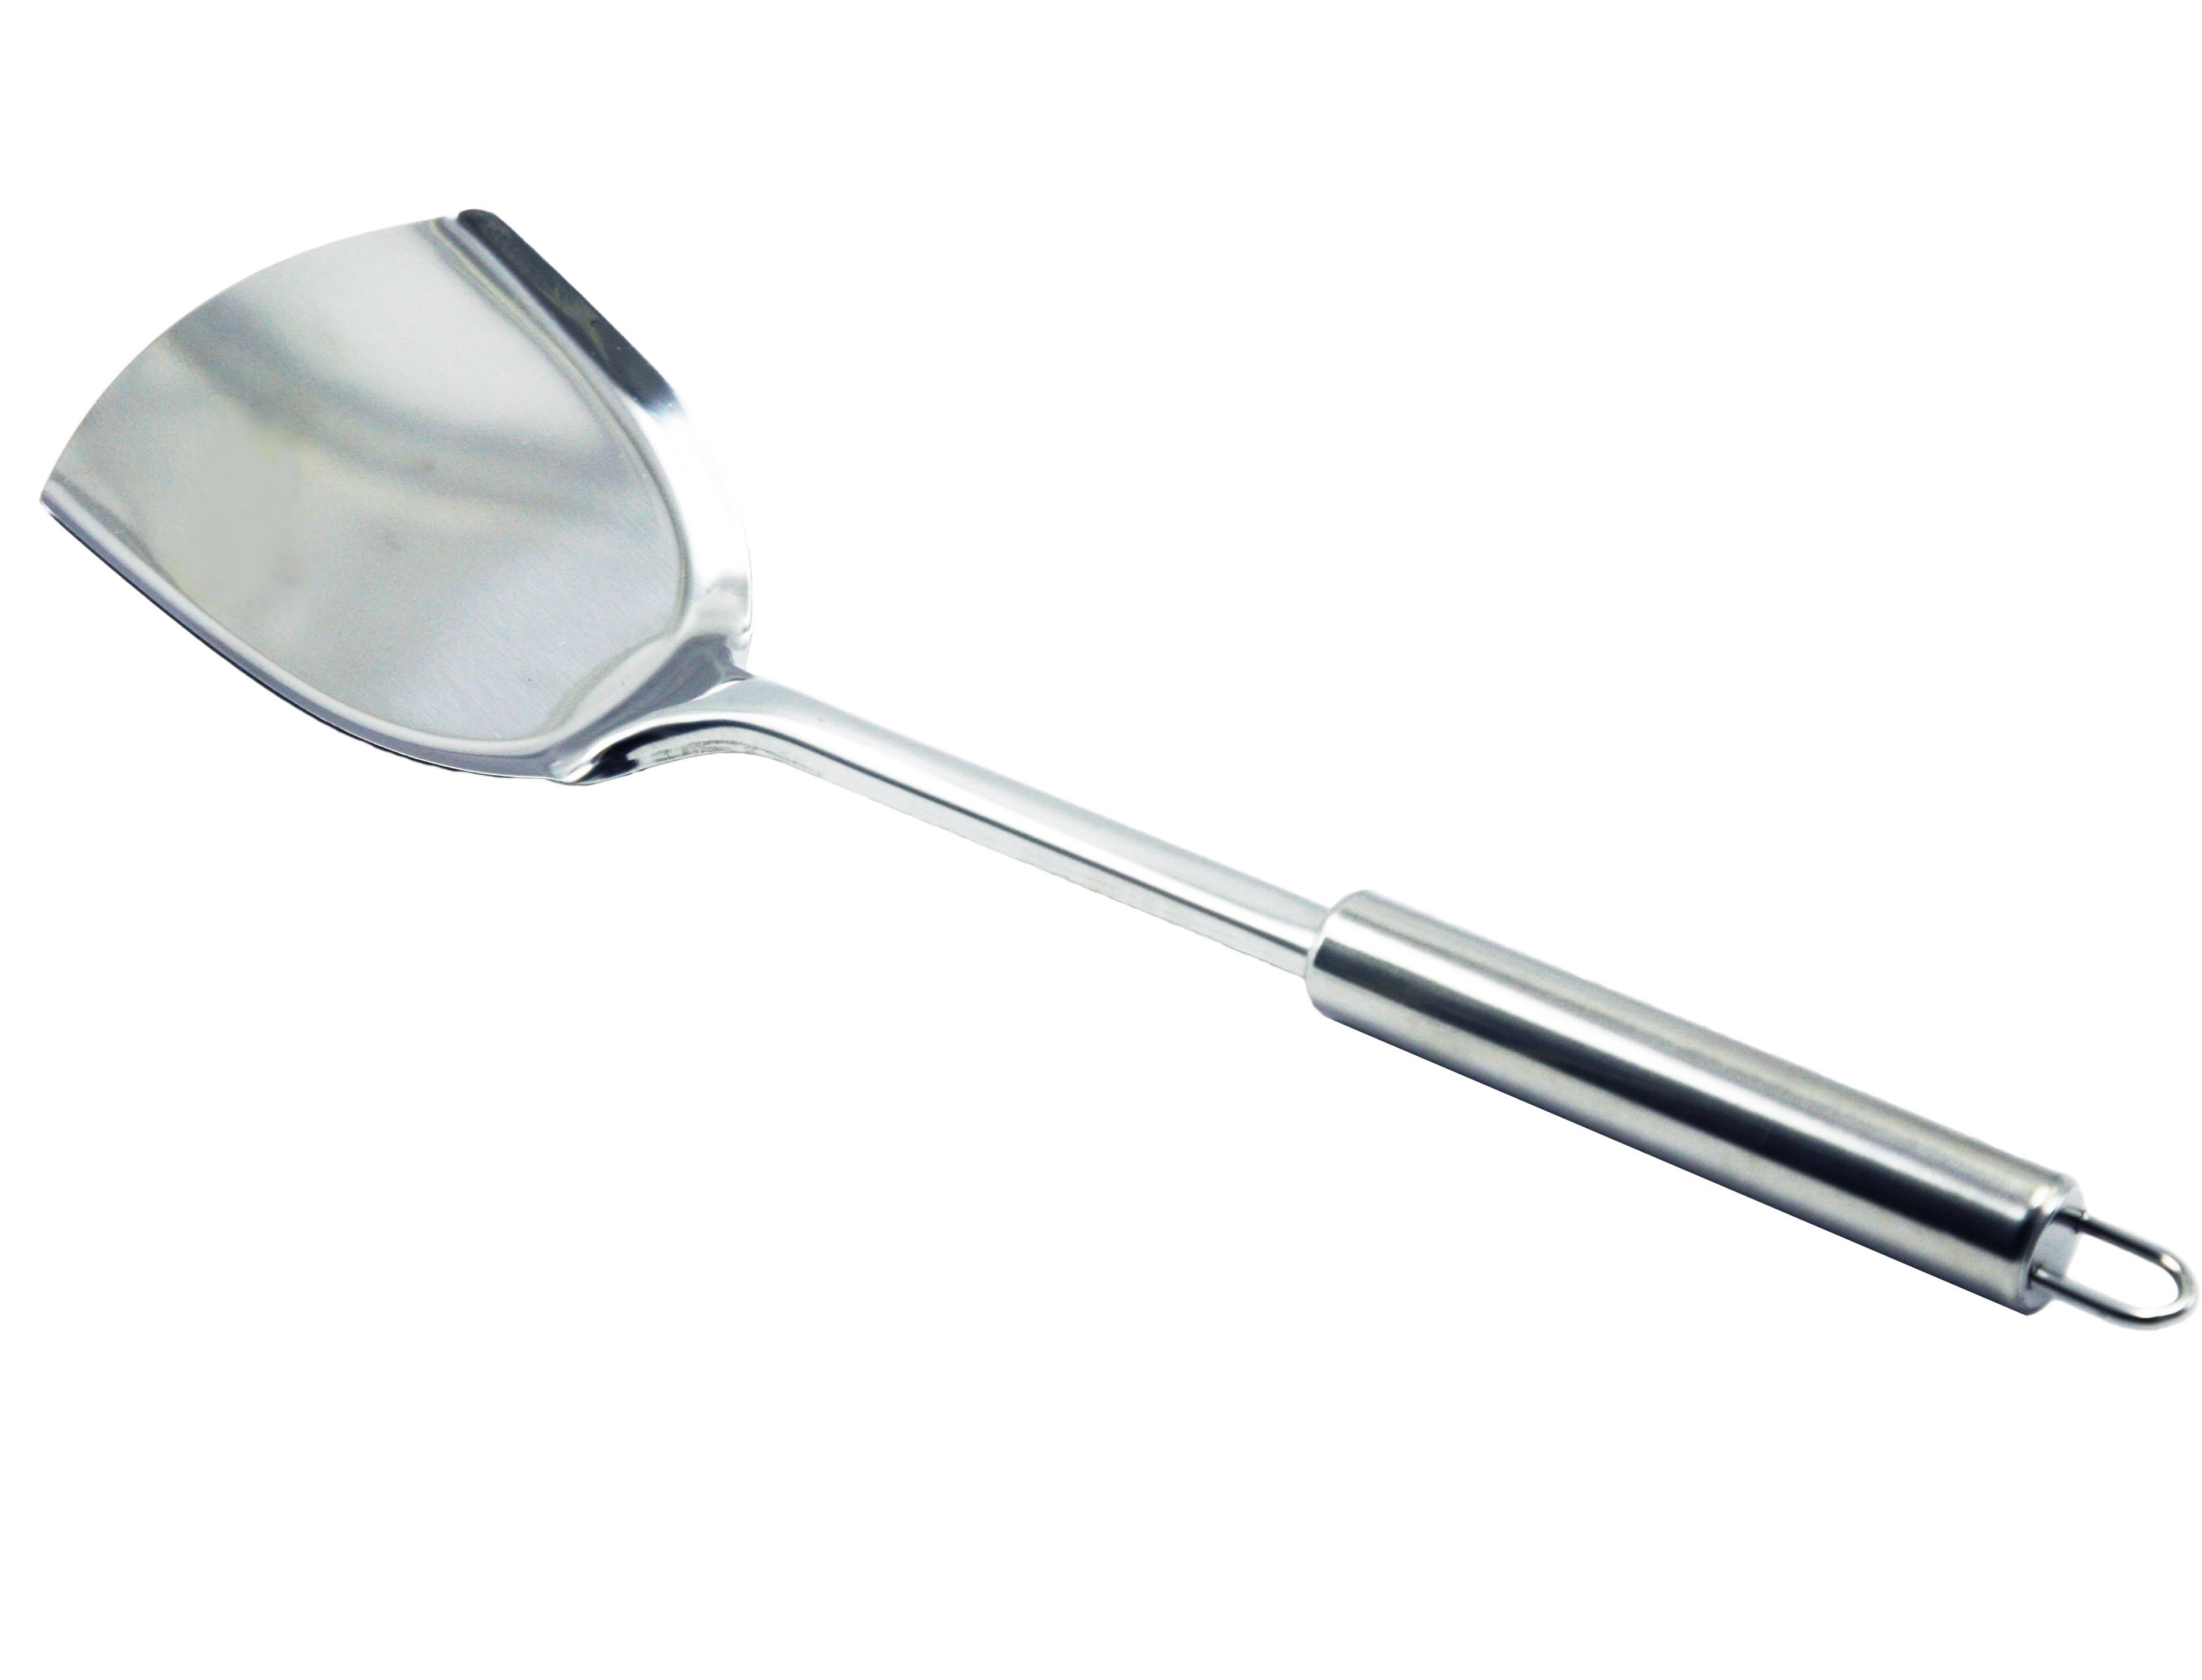 Stainless steel long handle Cooking fried shovel